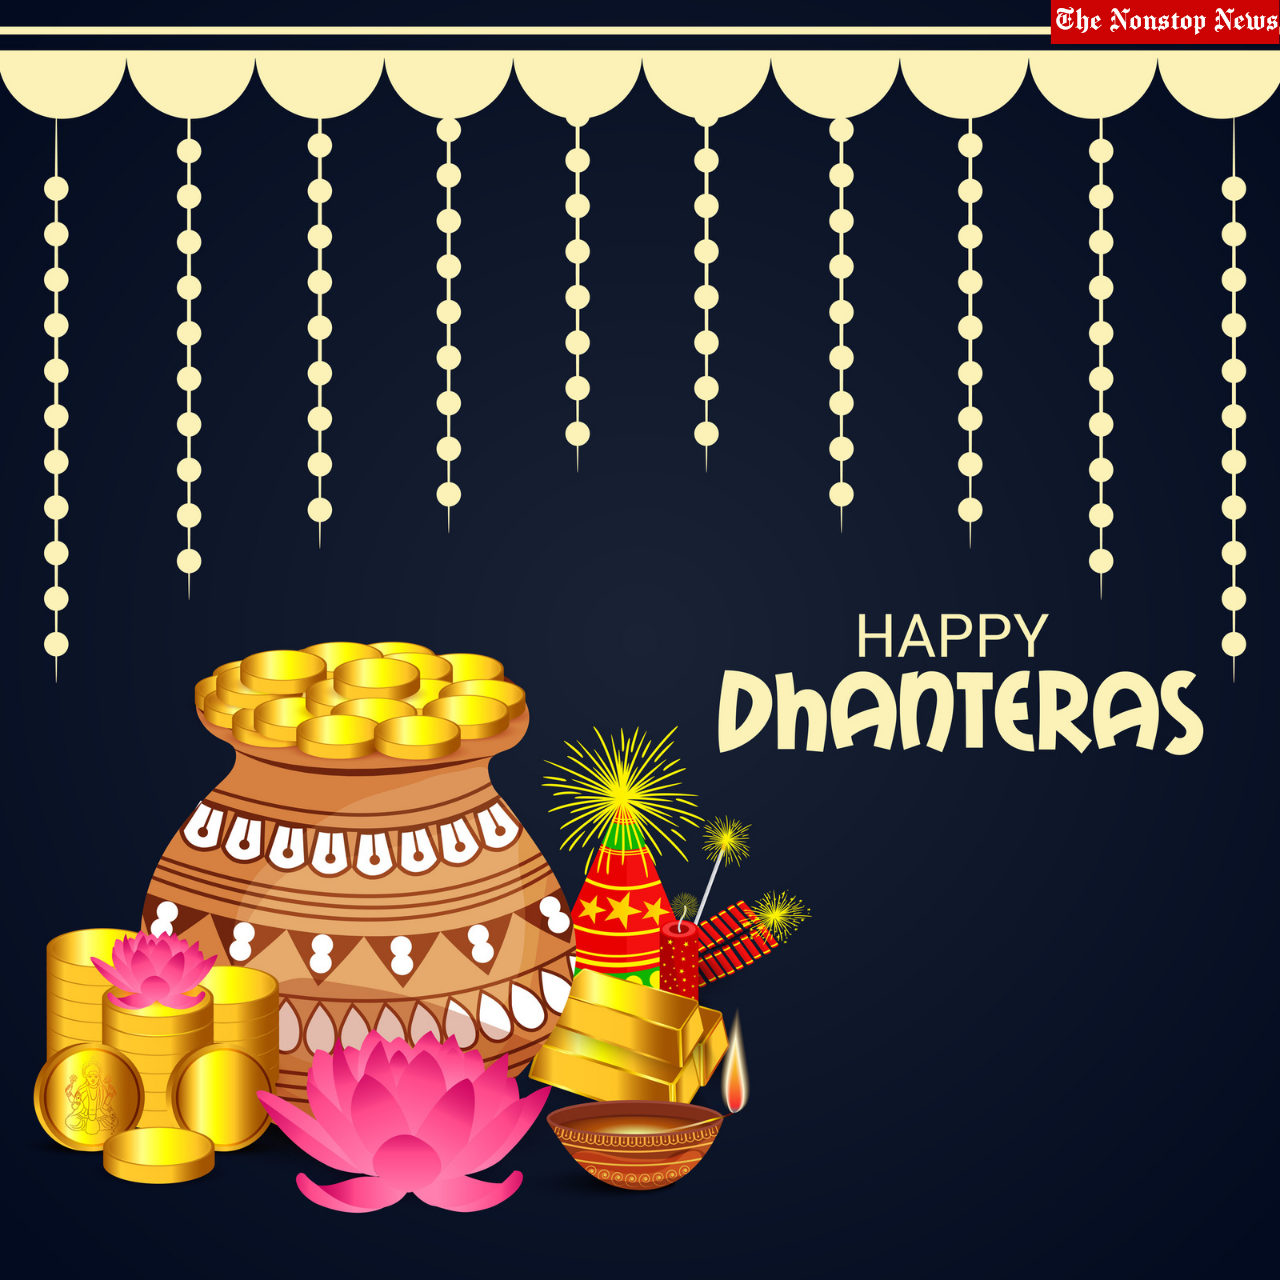 Dhanteras 2021 Instagram Captions, WhatsApp Status, Facebook Wishes, DP, and Wallpaper to Share